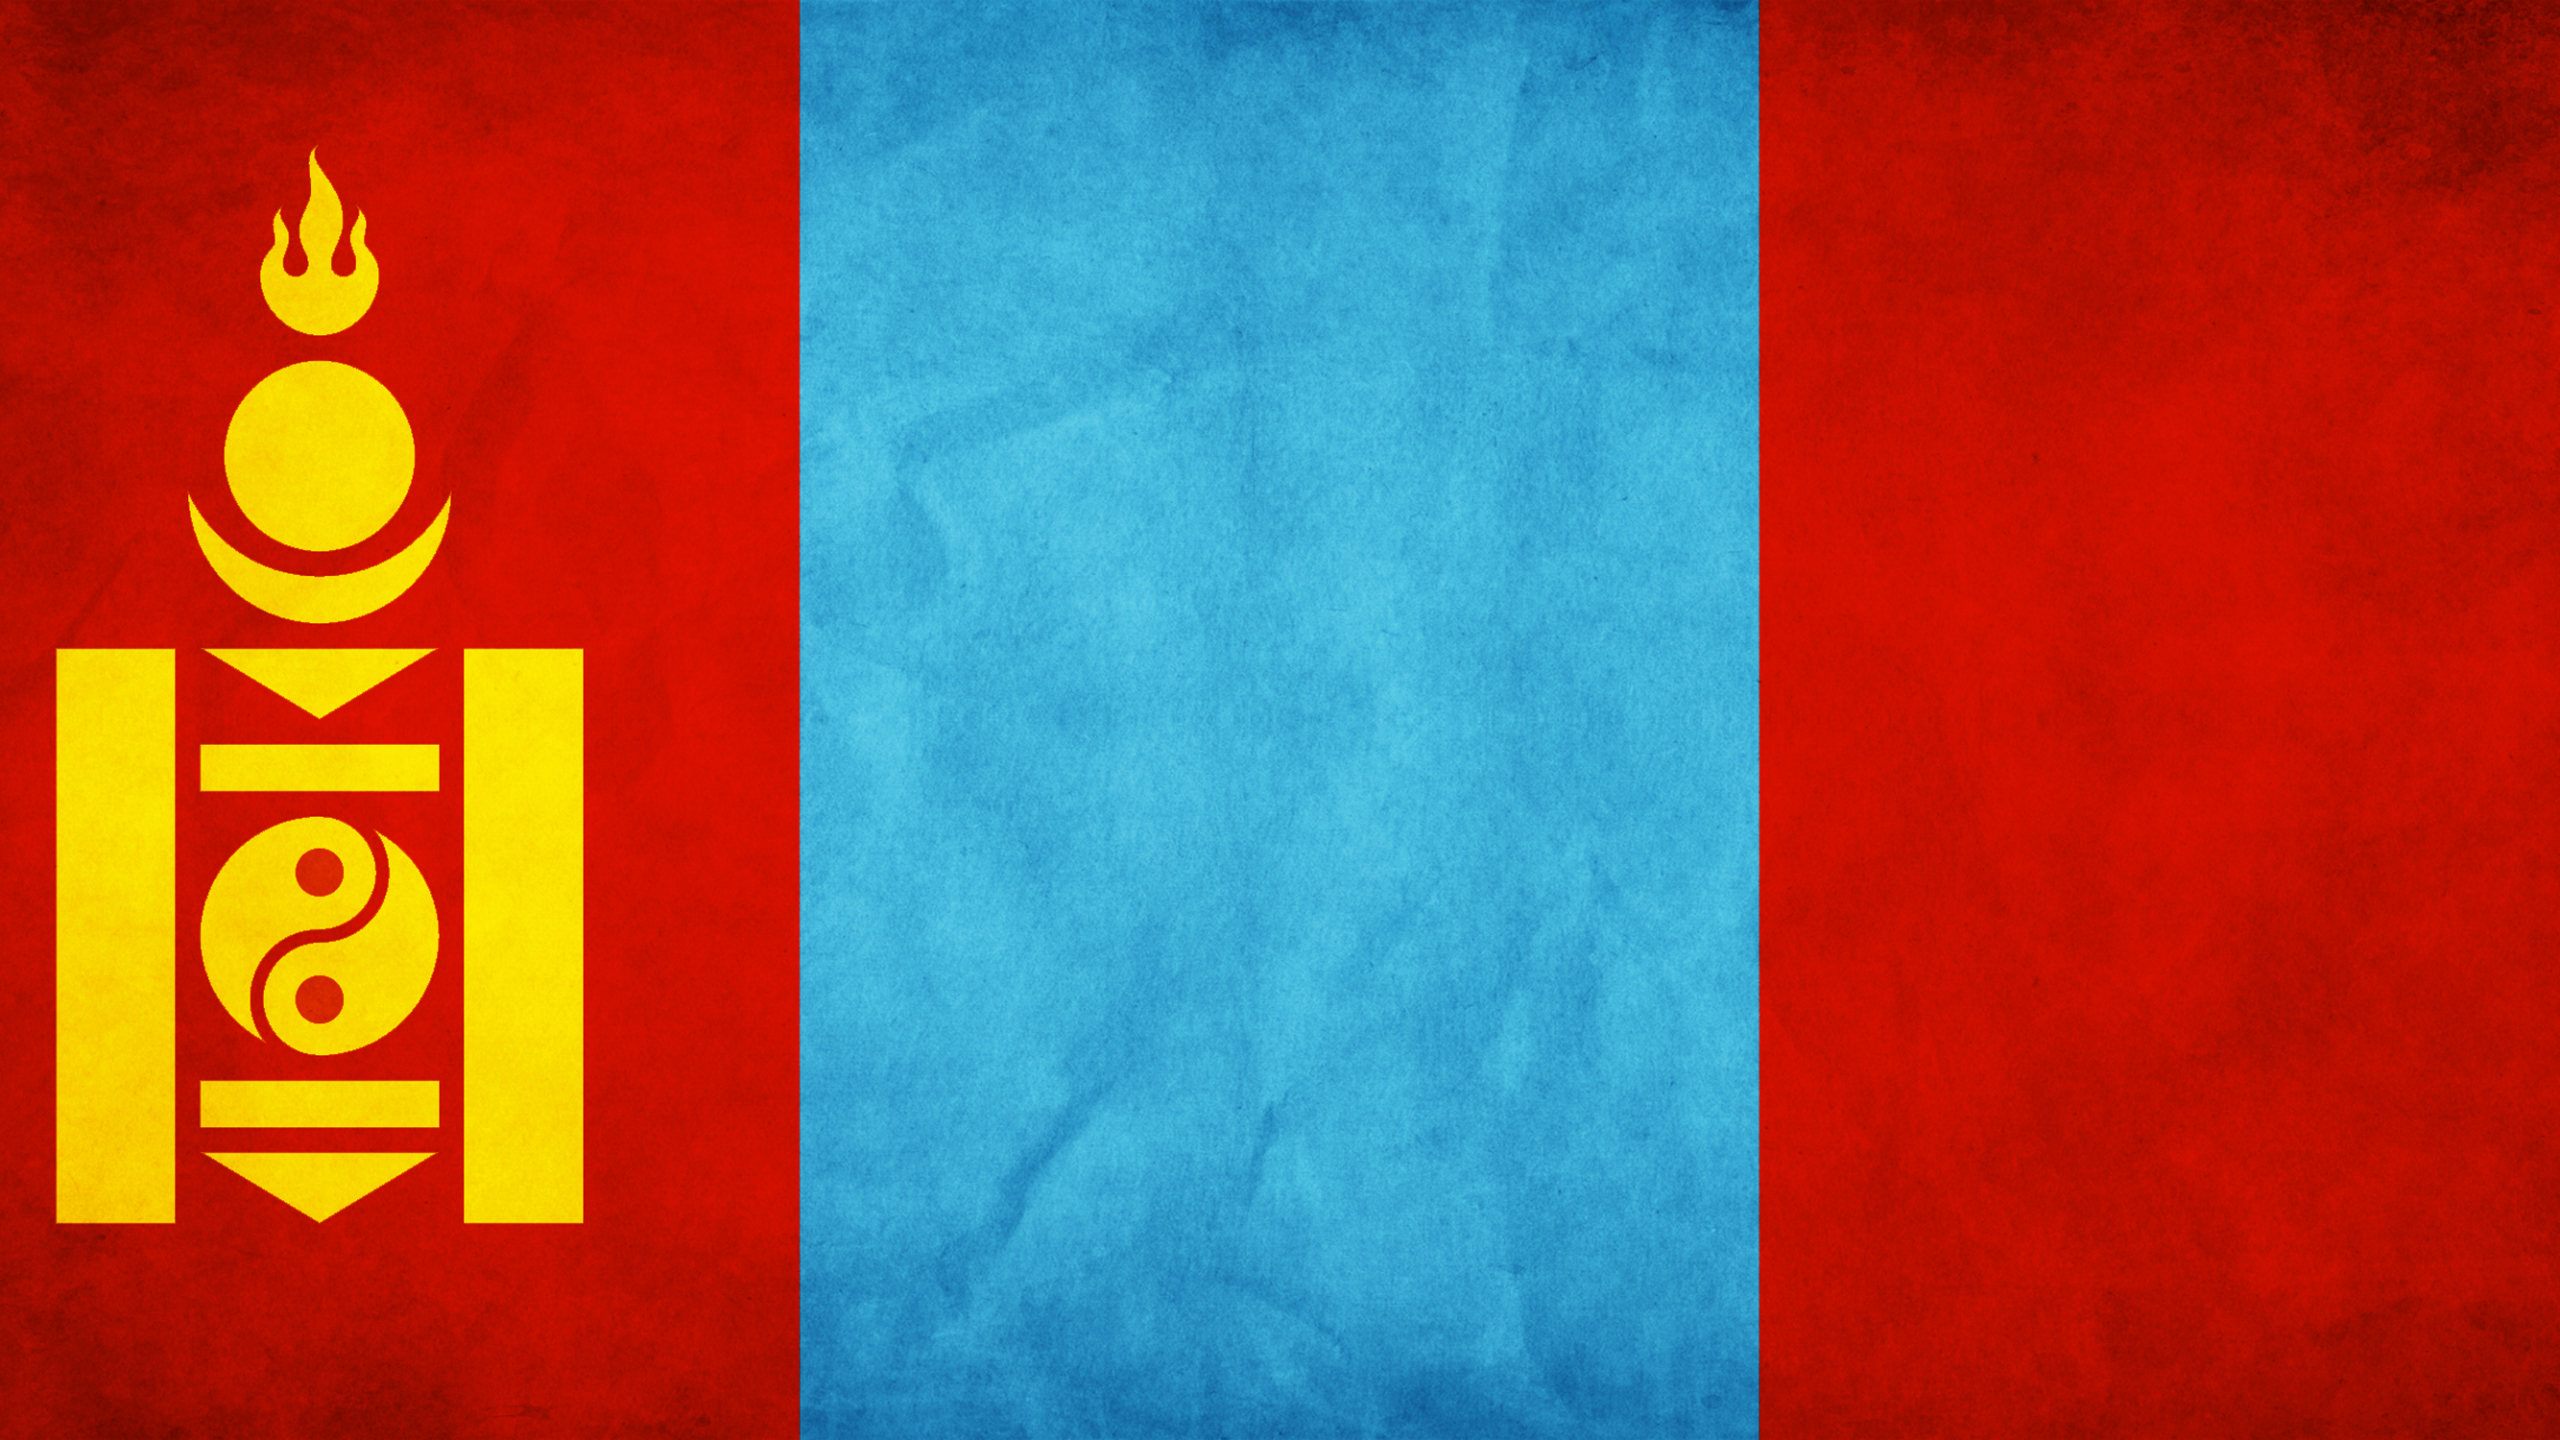 General 2560x1440 Mongolia Mongols Asian flag light blue turquoise red yellow